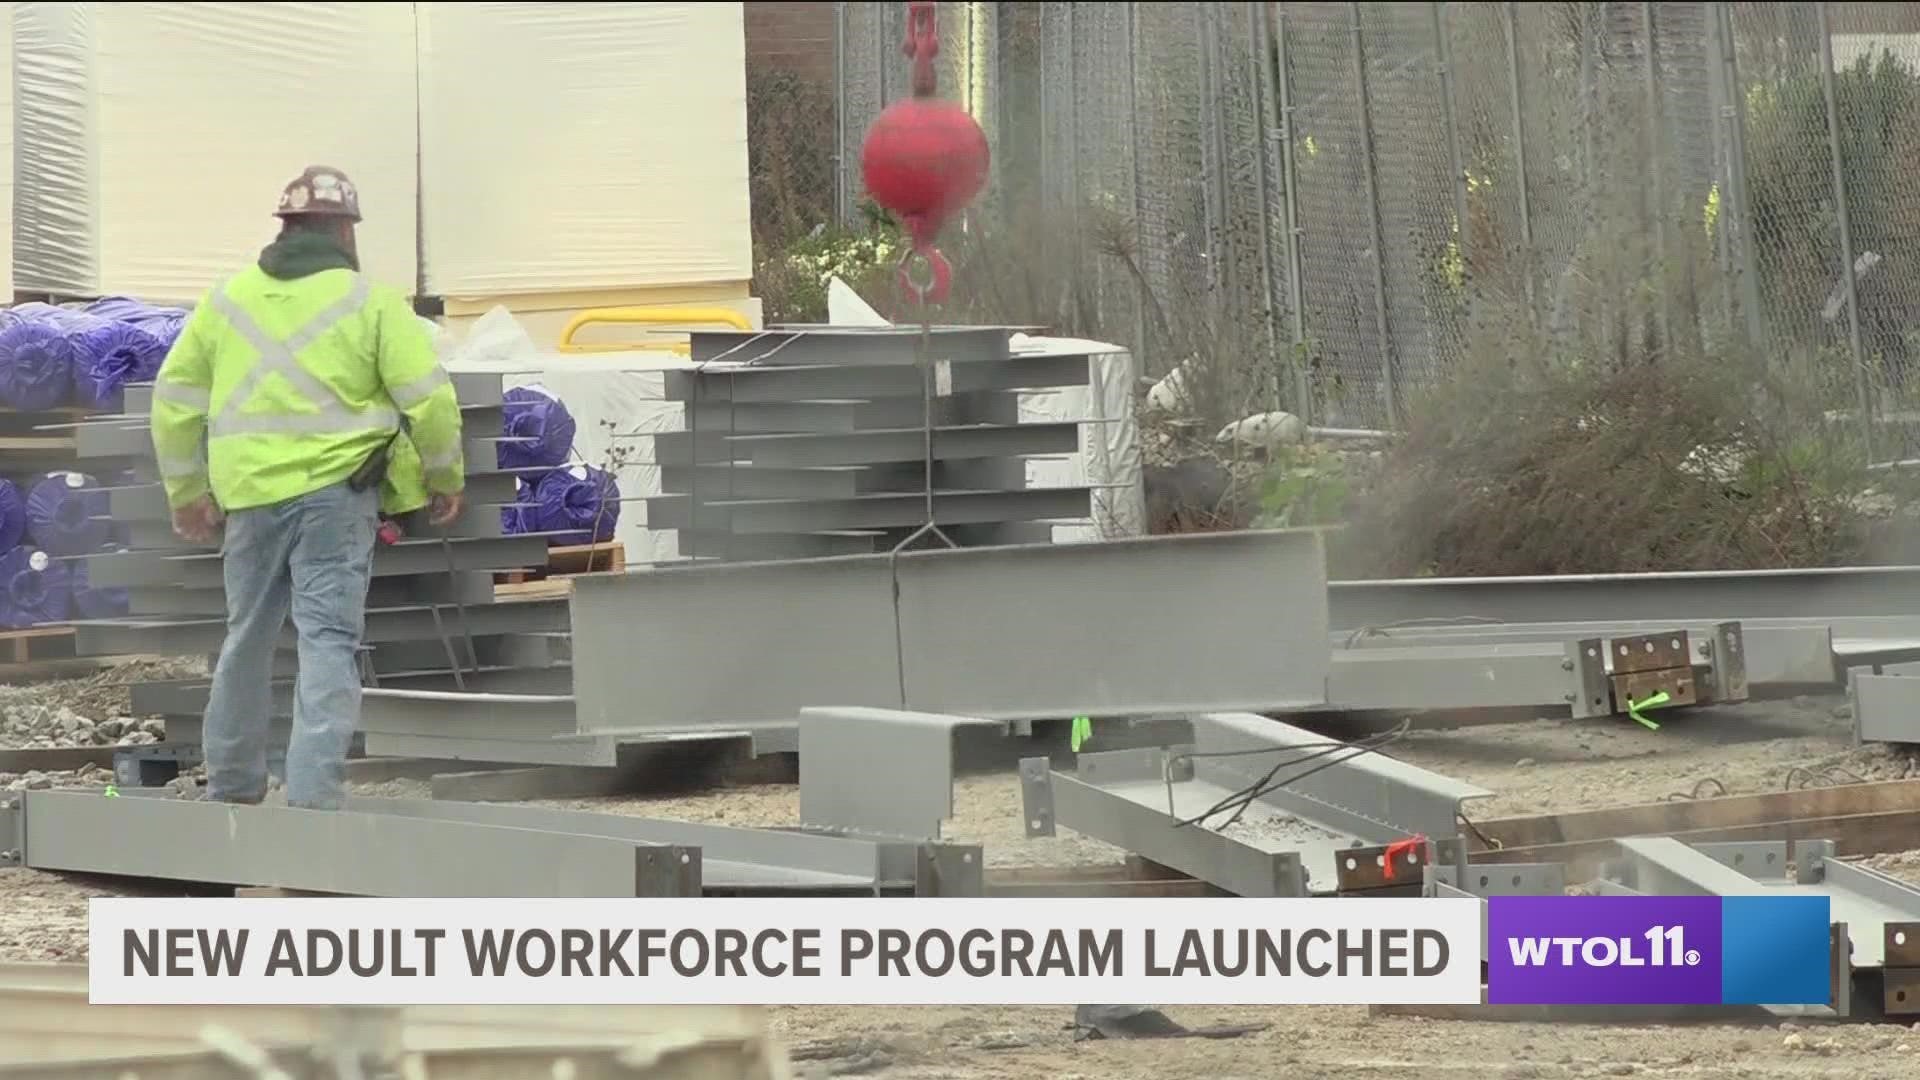 Raise the Bar's new Adult Workforce Program will offer assessments to better connect individuals with careers more in line with their skillsets and personal values.